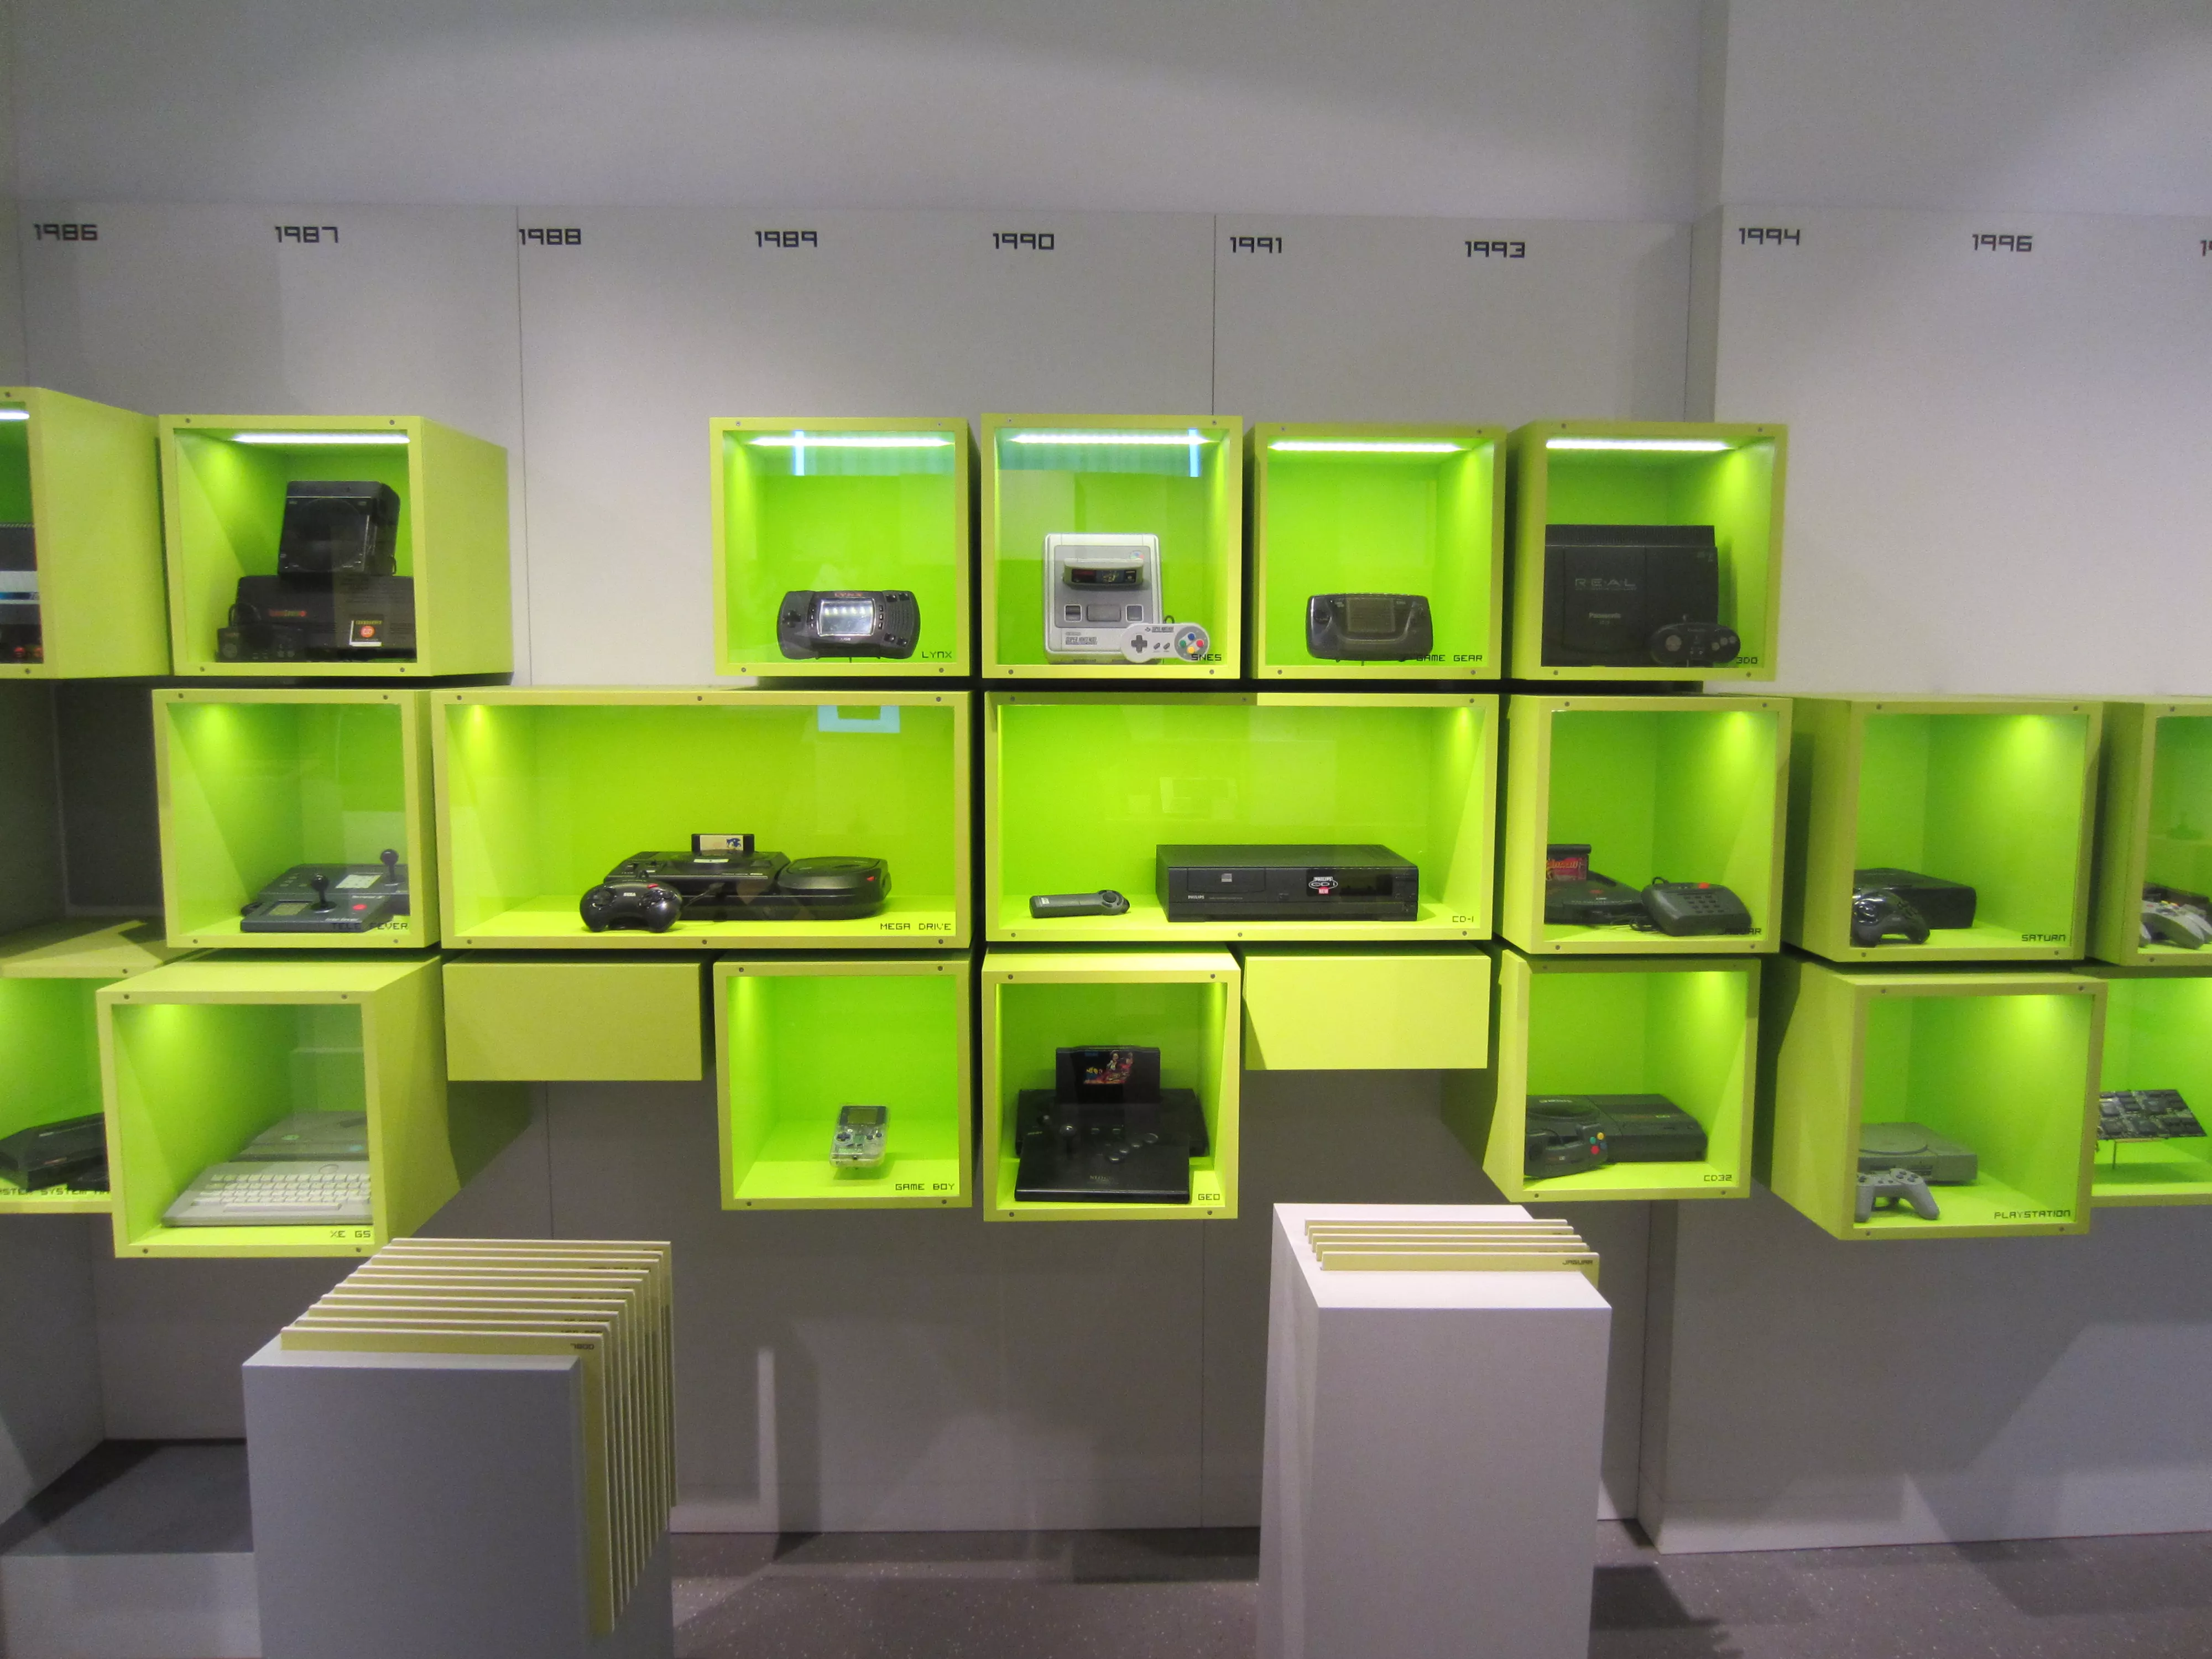 Computerspielemuseum in Germany, Europe | Museums - Rated 3.7